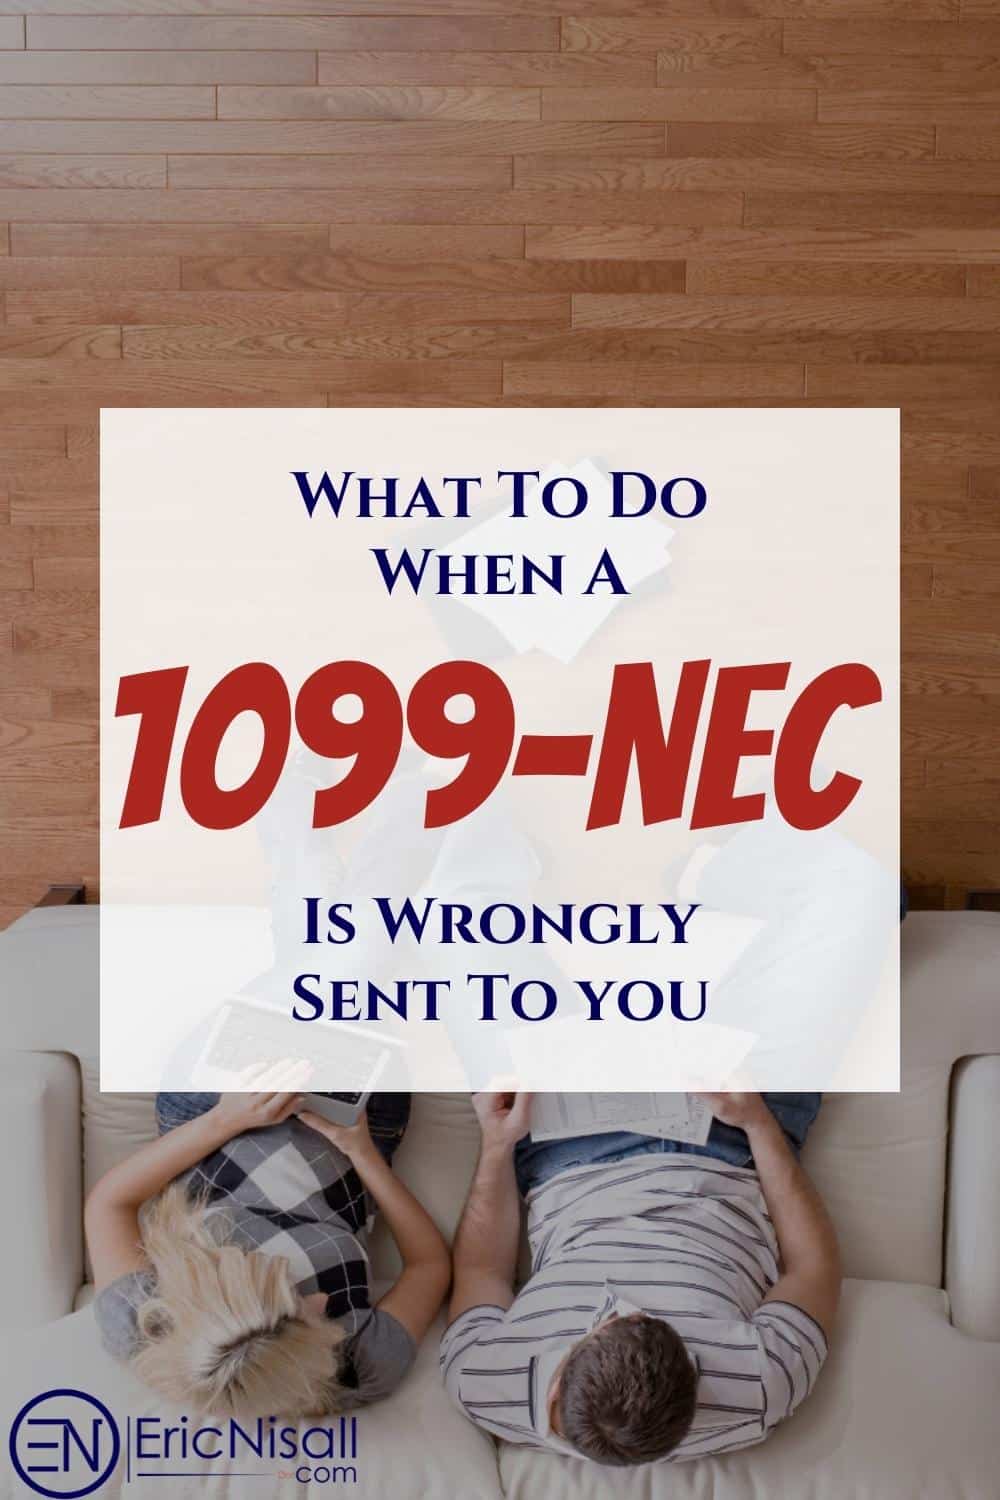 Paying taxes sucks. It sucks even more when someone wrongly filed a 1099-NEC resulting in duplicate income being reported to the IRS and you receive a letter saying you owe even more. Here is what you should do to resolve that issue. via @ericnisall